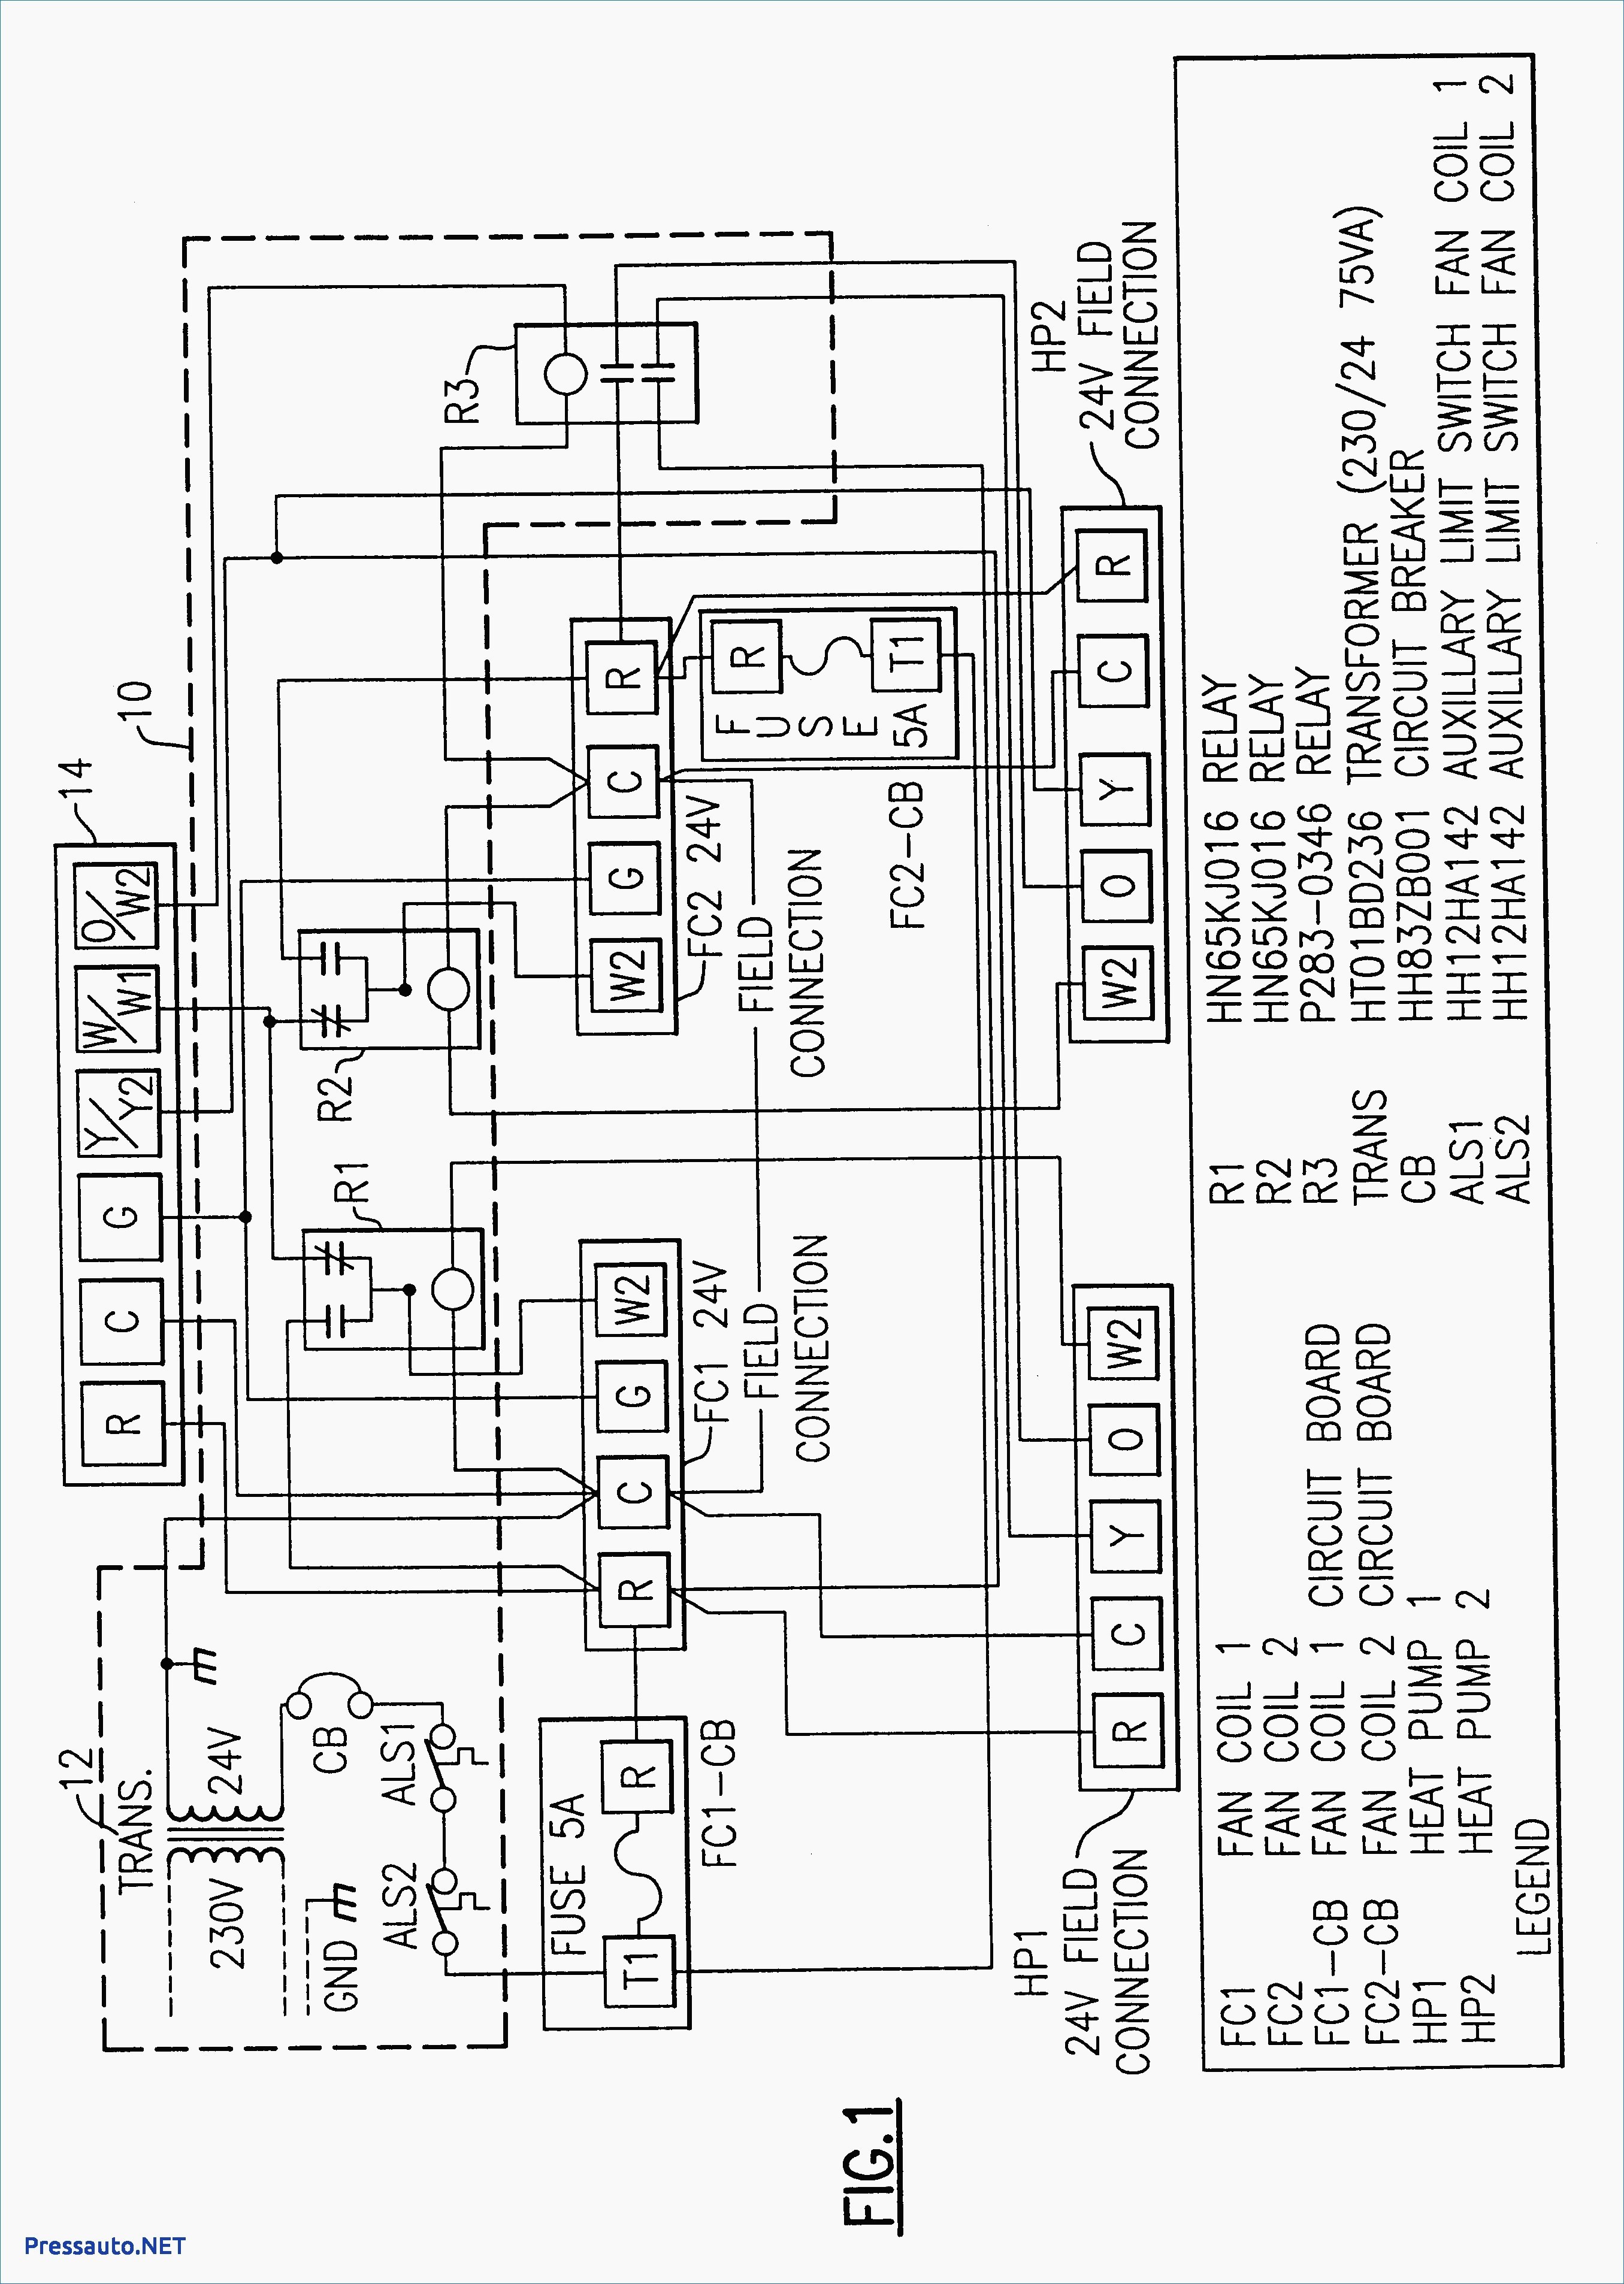 Wiring Diagram for York Air Conditioner New Wiring Diagram Ac York New Old Fashioned York Rooftop